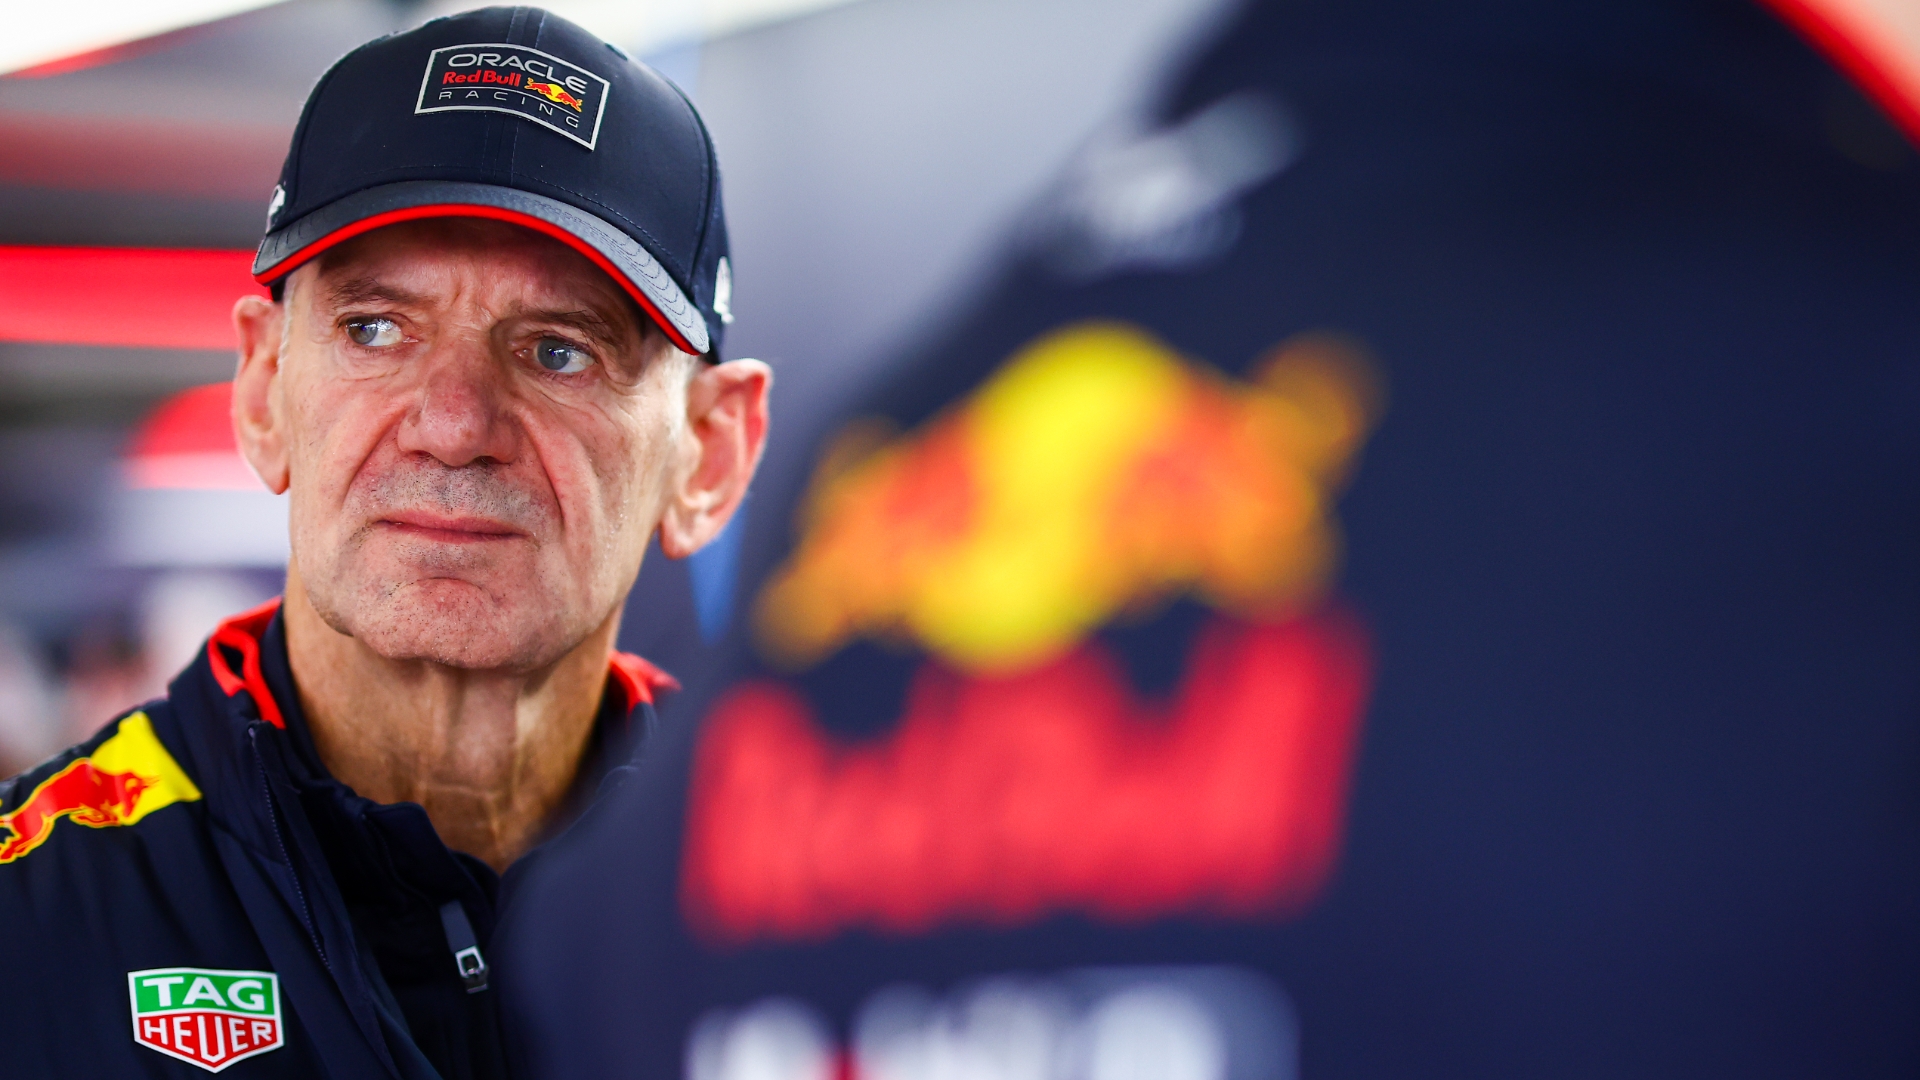 Was designer Adrian Newey's exit from RedBull expected?